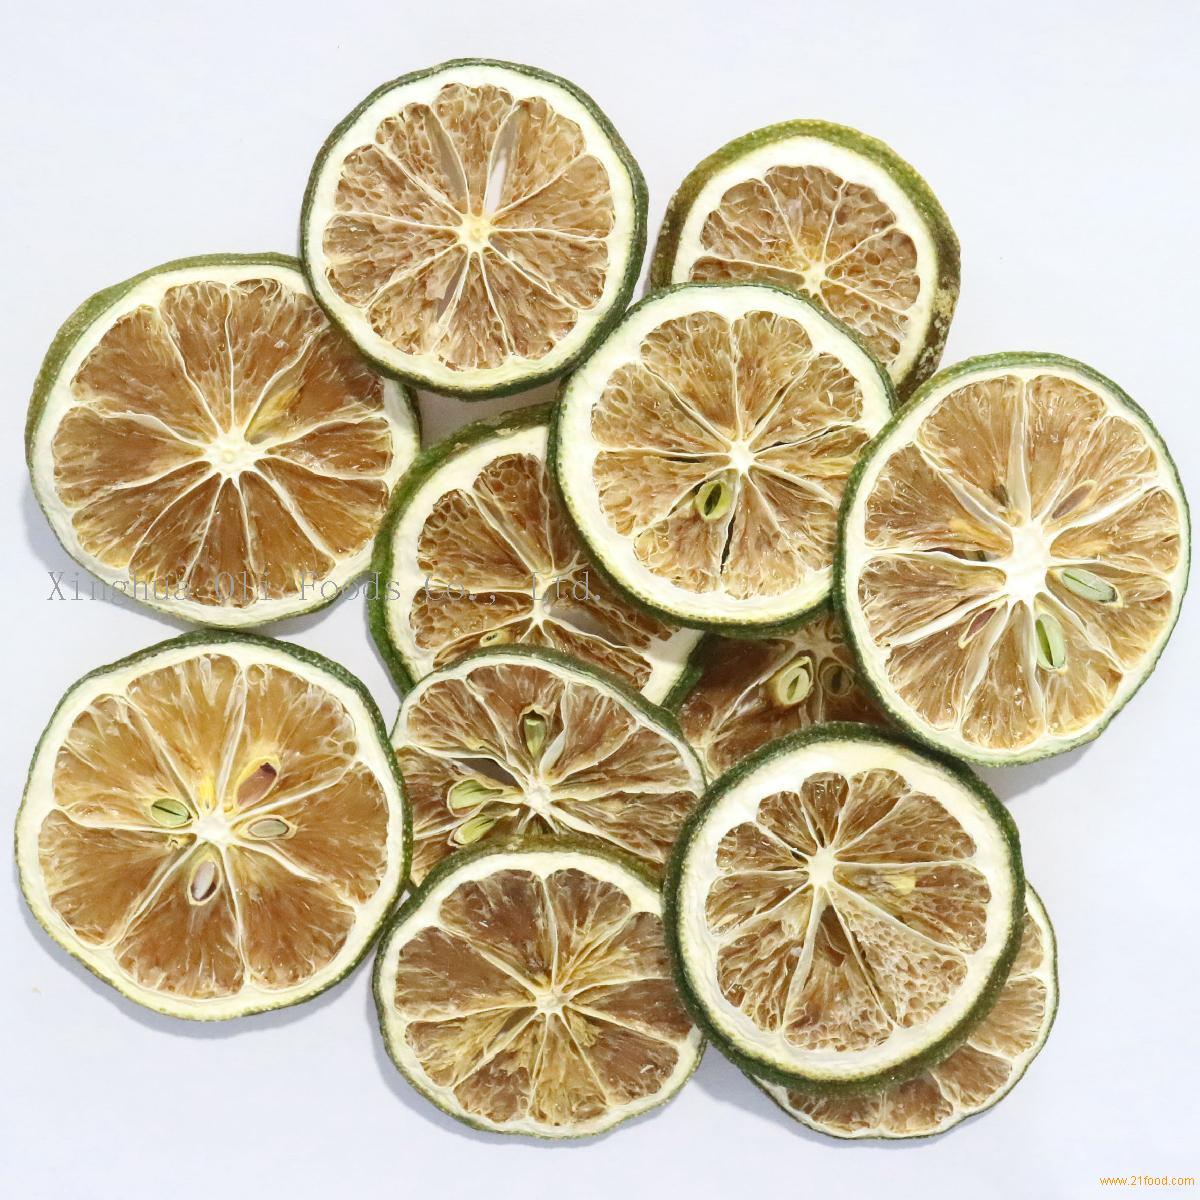 Dried green lemon slices without SO2 Air dried